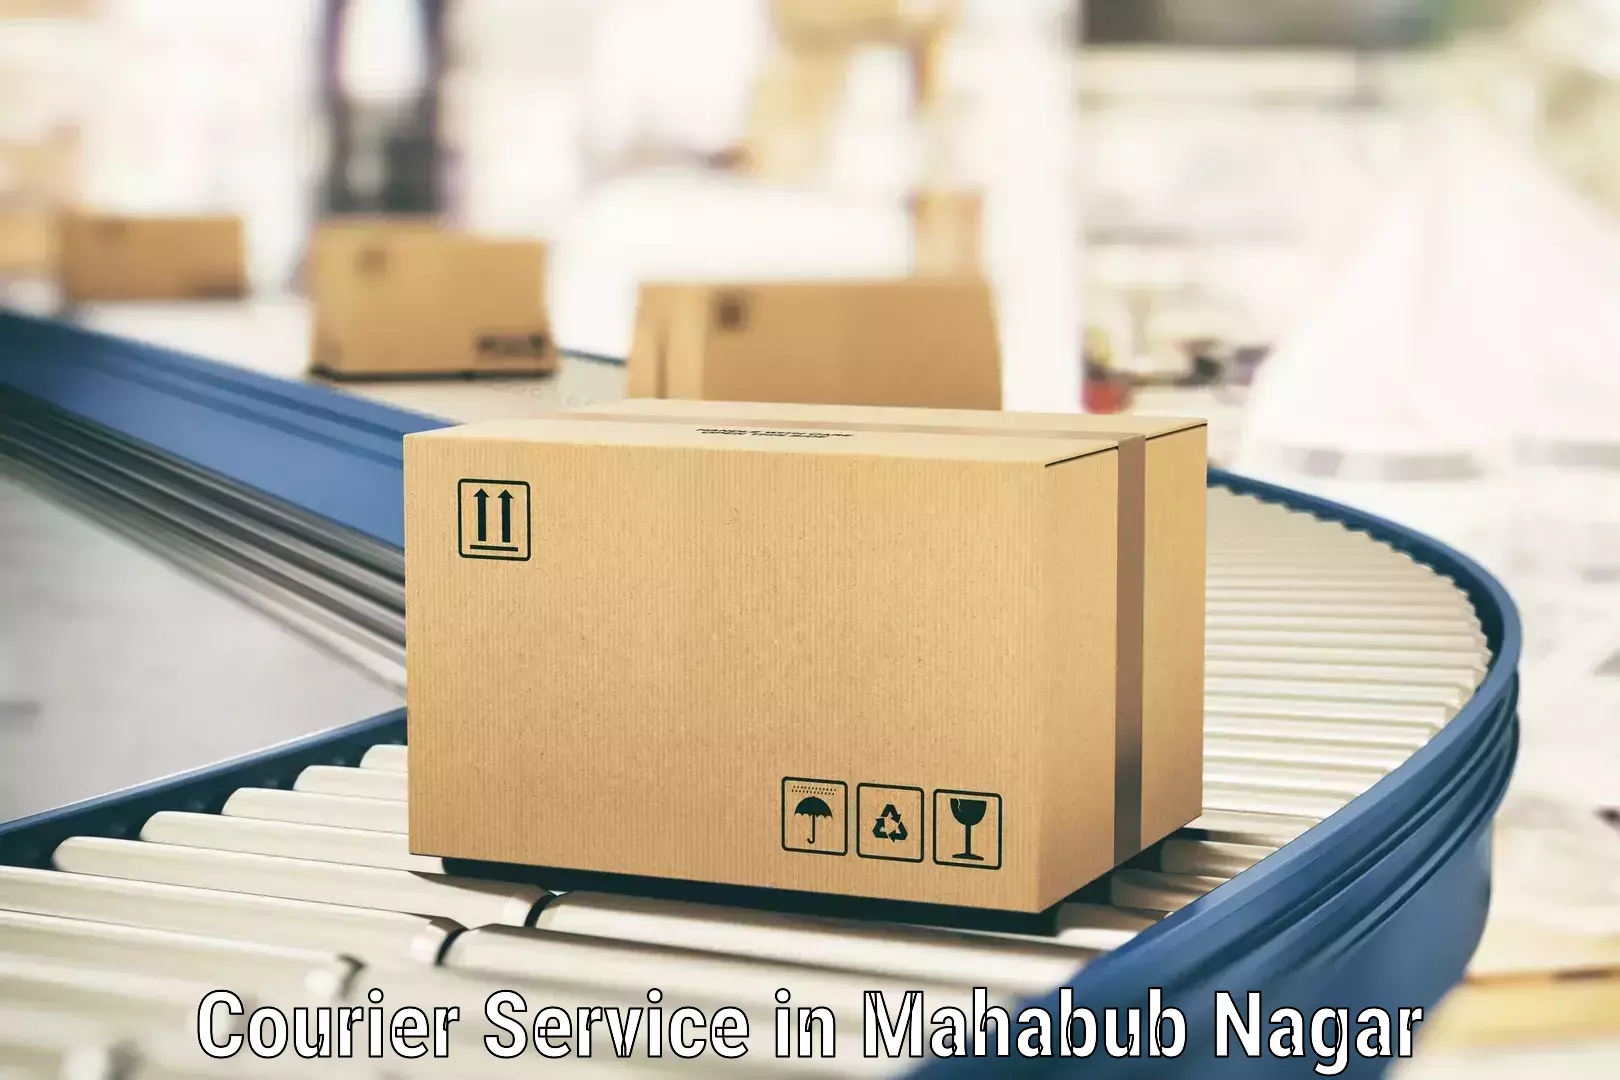 Corporate courier solutions in Mahabub Nagar